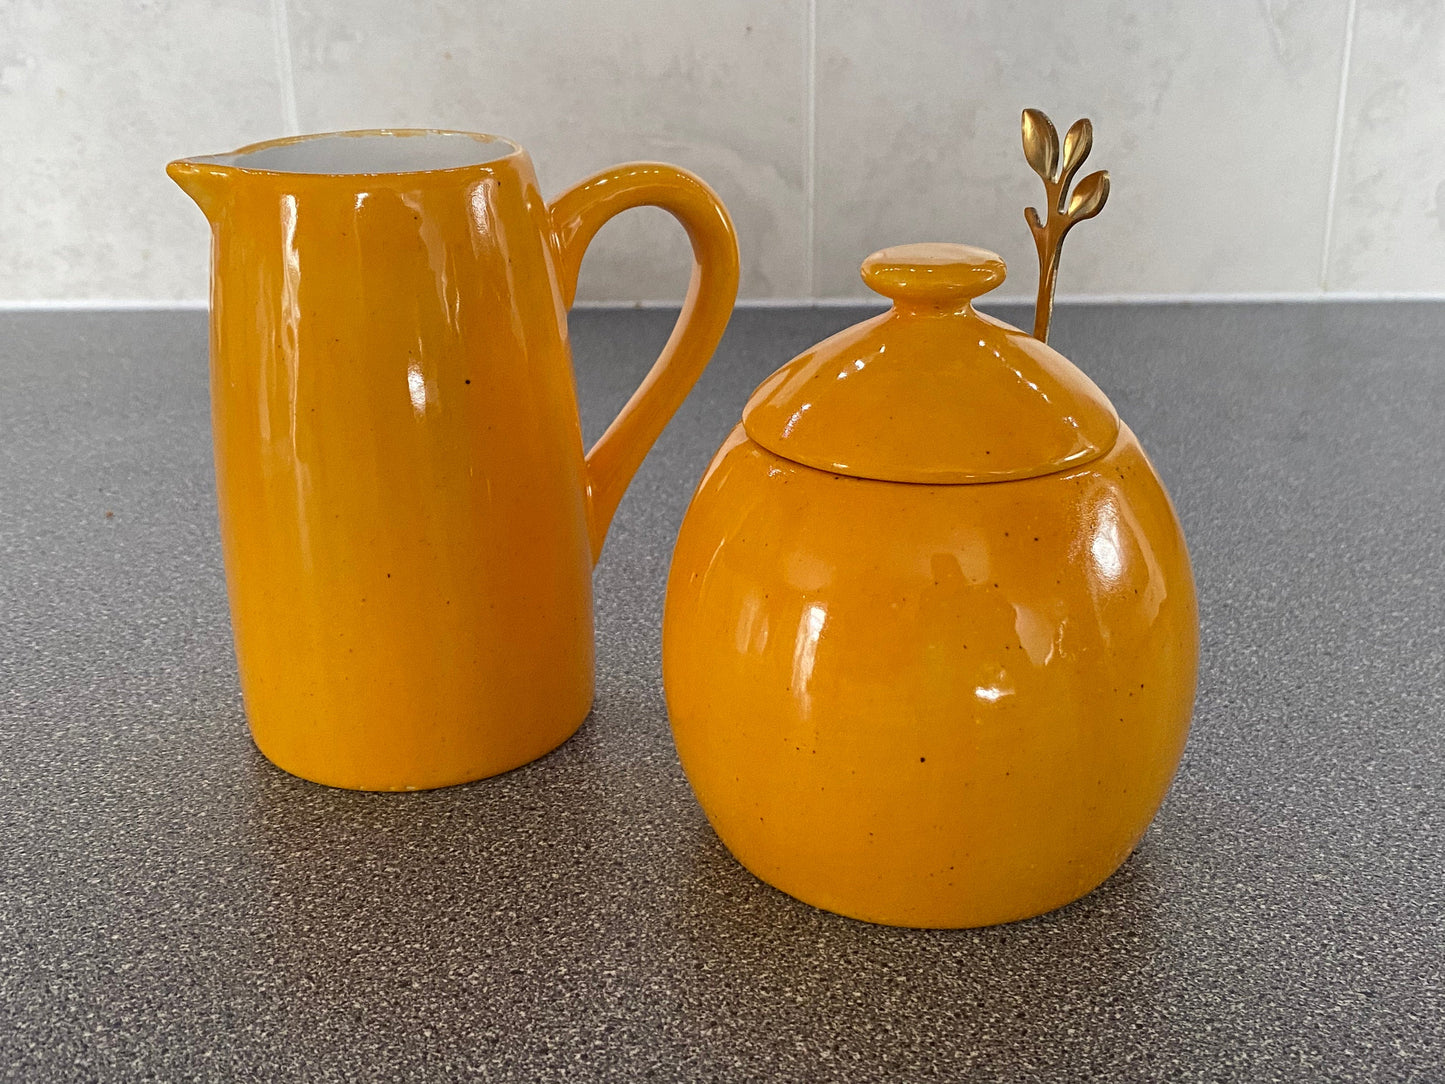 Butter Dish, Sugar Bowl and Cream Jug Set - Speckled Yellow - PeterBowenArt